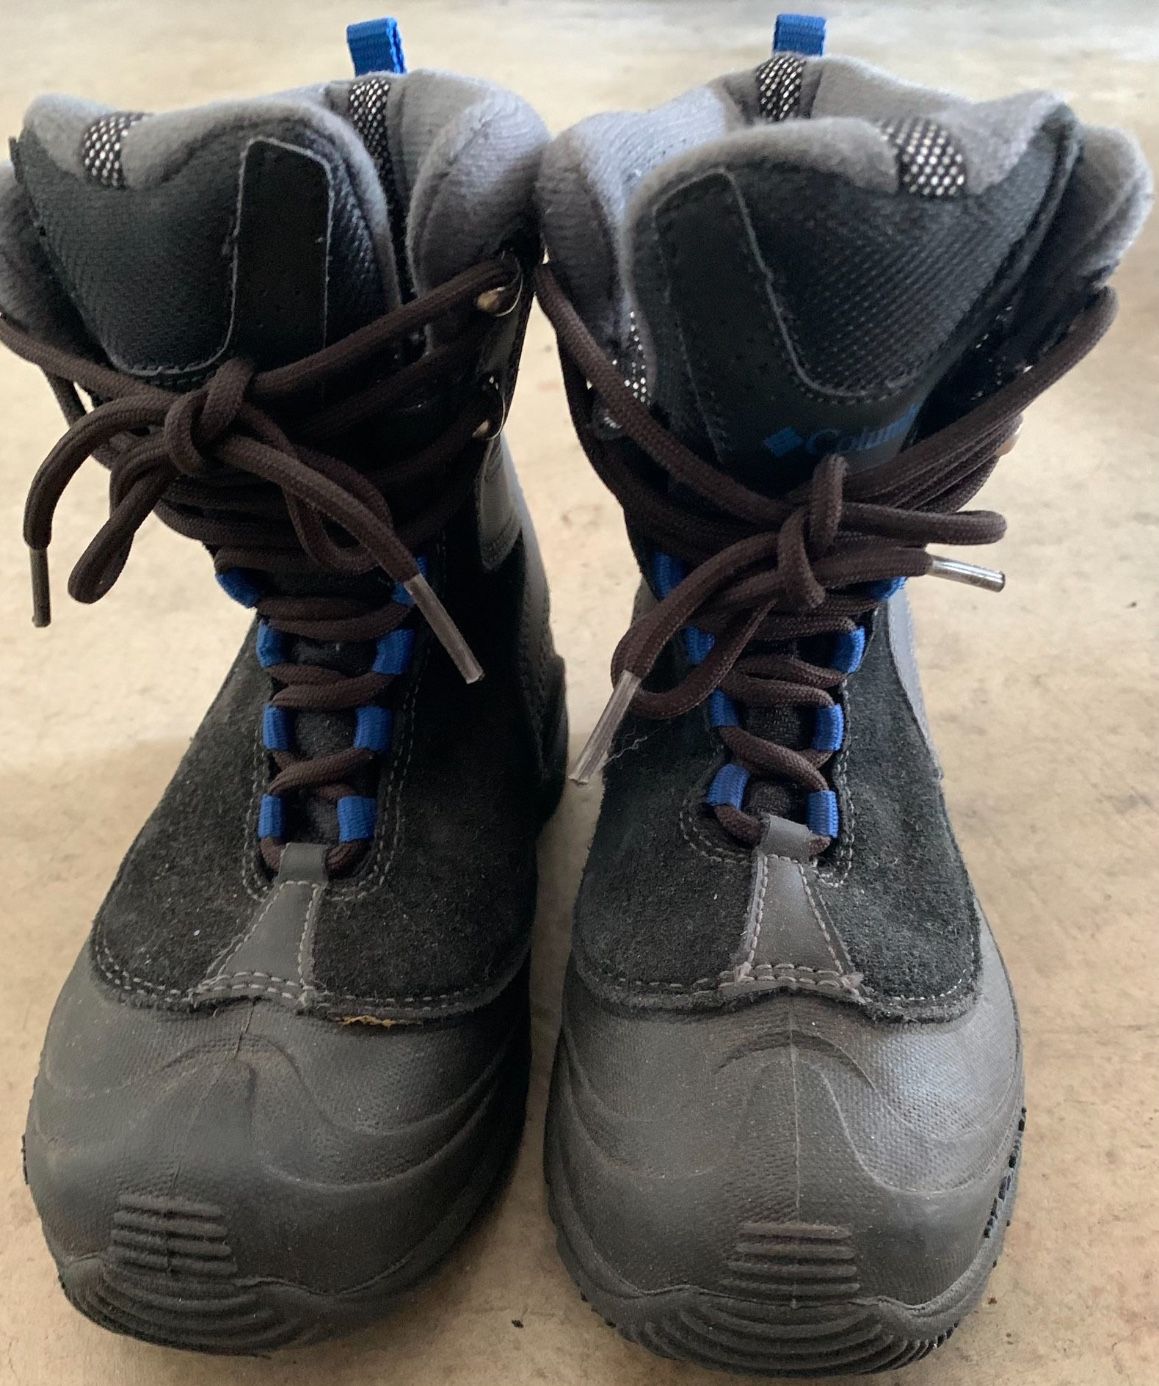 Kids Hiking Or Snow Boots Size 2